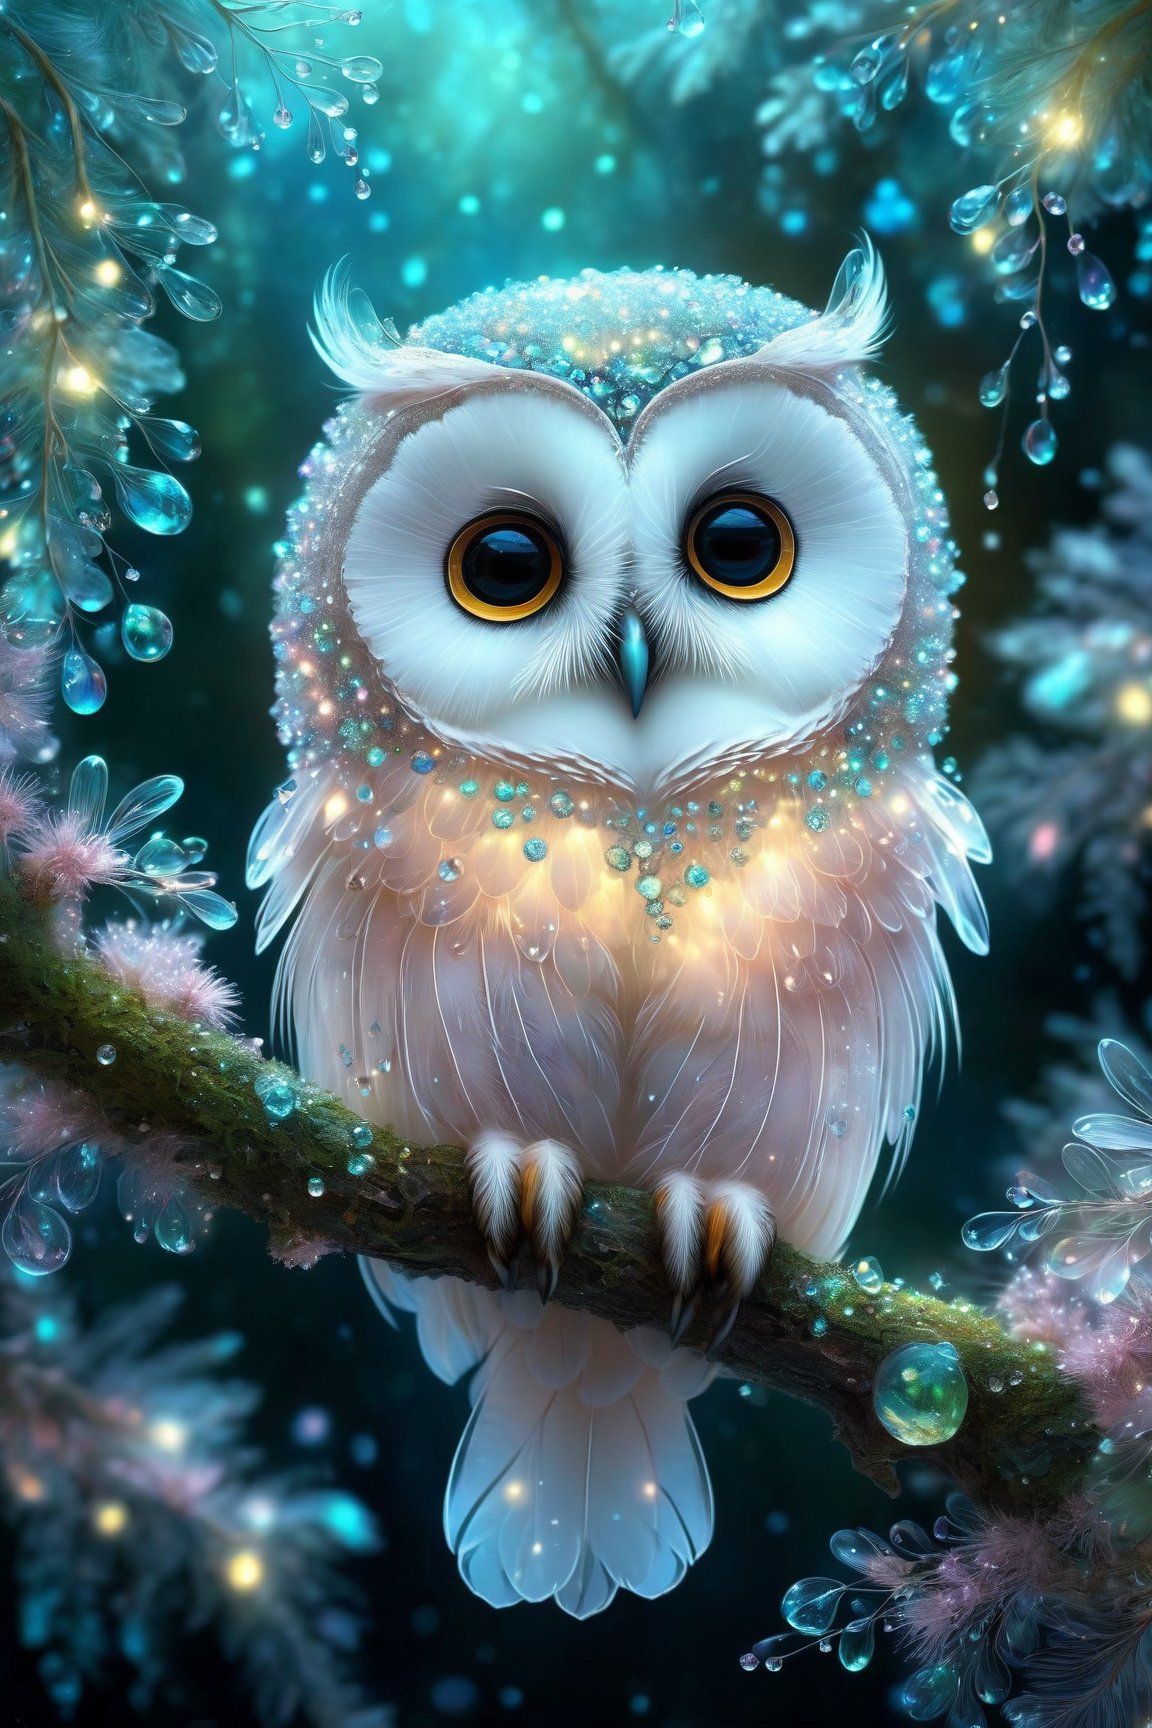 glittering night, cuteness overload, forest background, photography cute transparent ghostly happy dreamy owl sitting on a tree branch filled with detailed tiny mimosa flowers inside fully transparent body, detailed transparent feathers, bioluminescence, leaves, ethereal, ice fairytale fantasy,by Andy Kehoe, water drops, dynamic pose, tender, soft pastel colors
